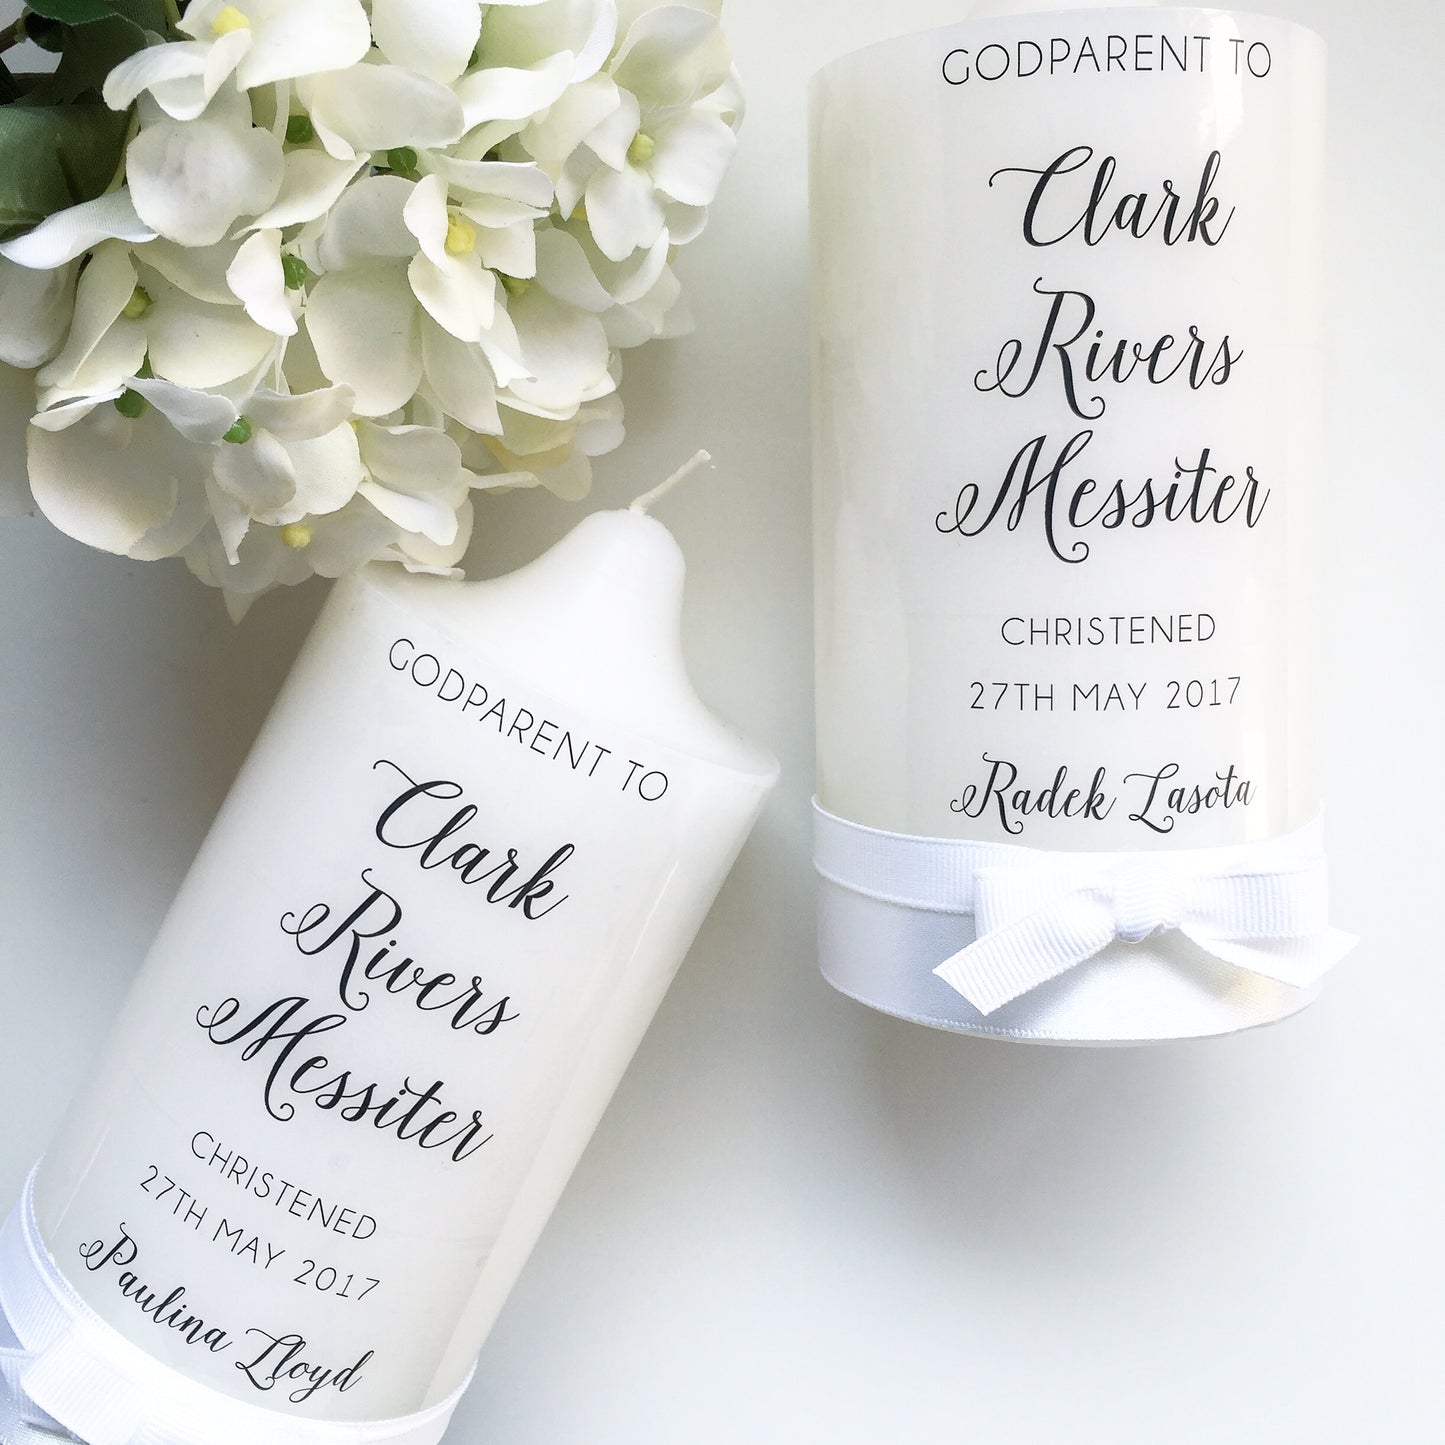  Godparent Baptism Candle is perfect for gifting to a godparent. This baptism candle can be a thoughtful and meaningful gesture to show appreciation and acknowledge the godparent's role in a child's life and spiritual upbringing.